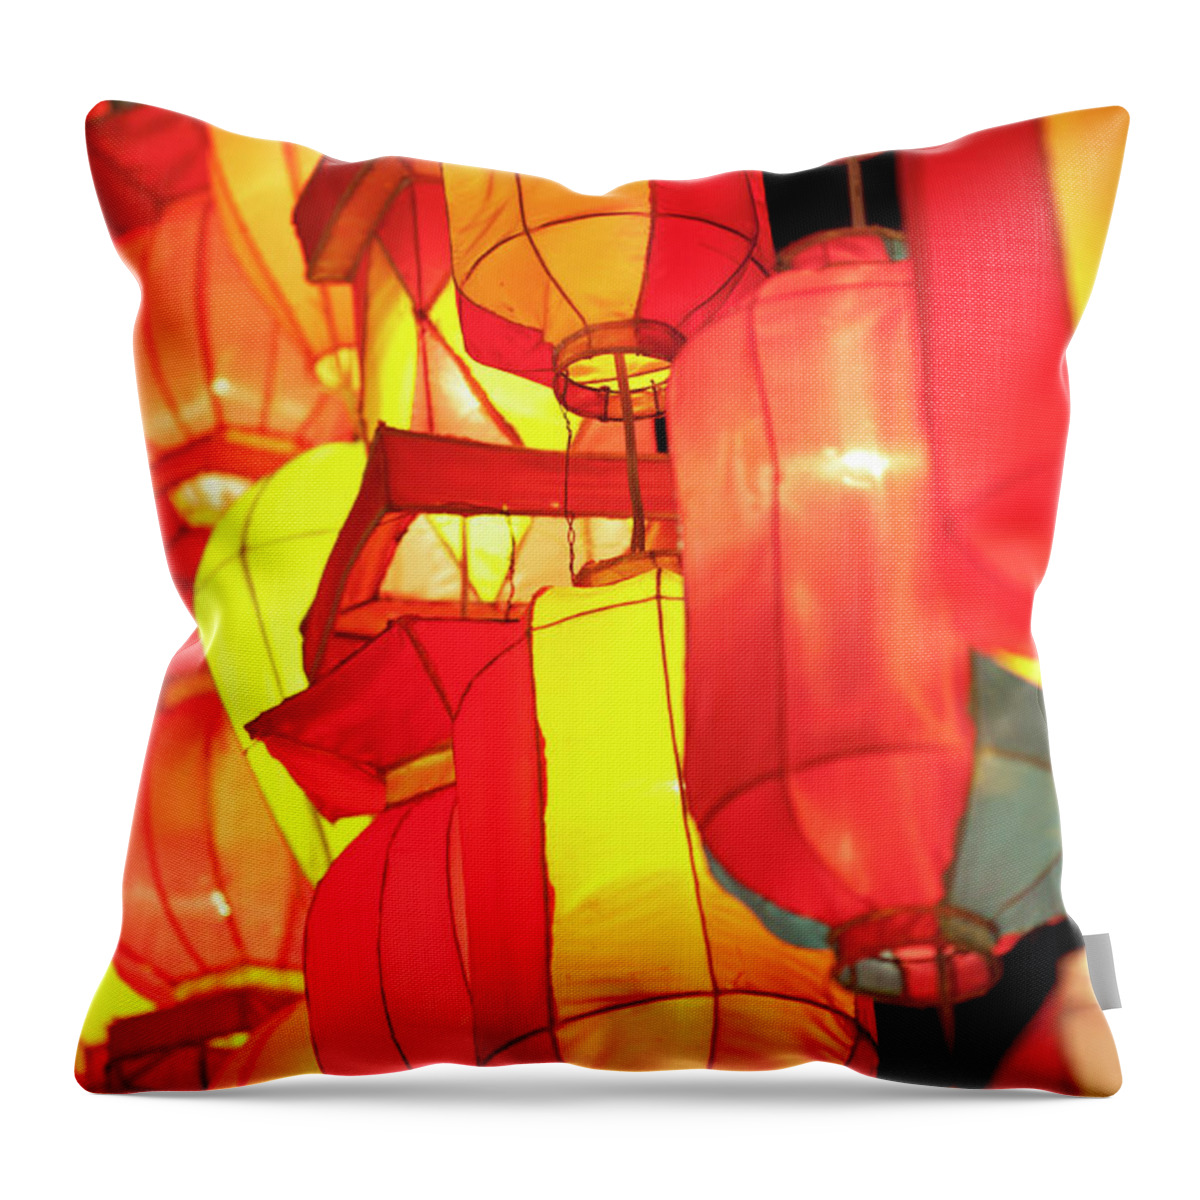 Event Throw Pillow featuring the photograph Asian Lanterns by Oneclearvision